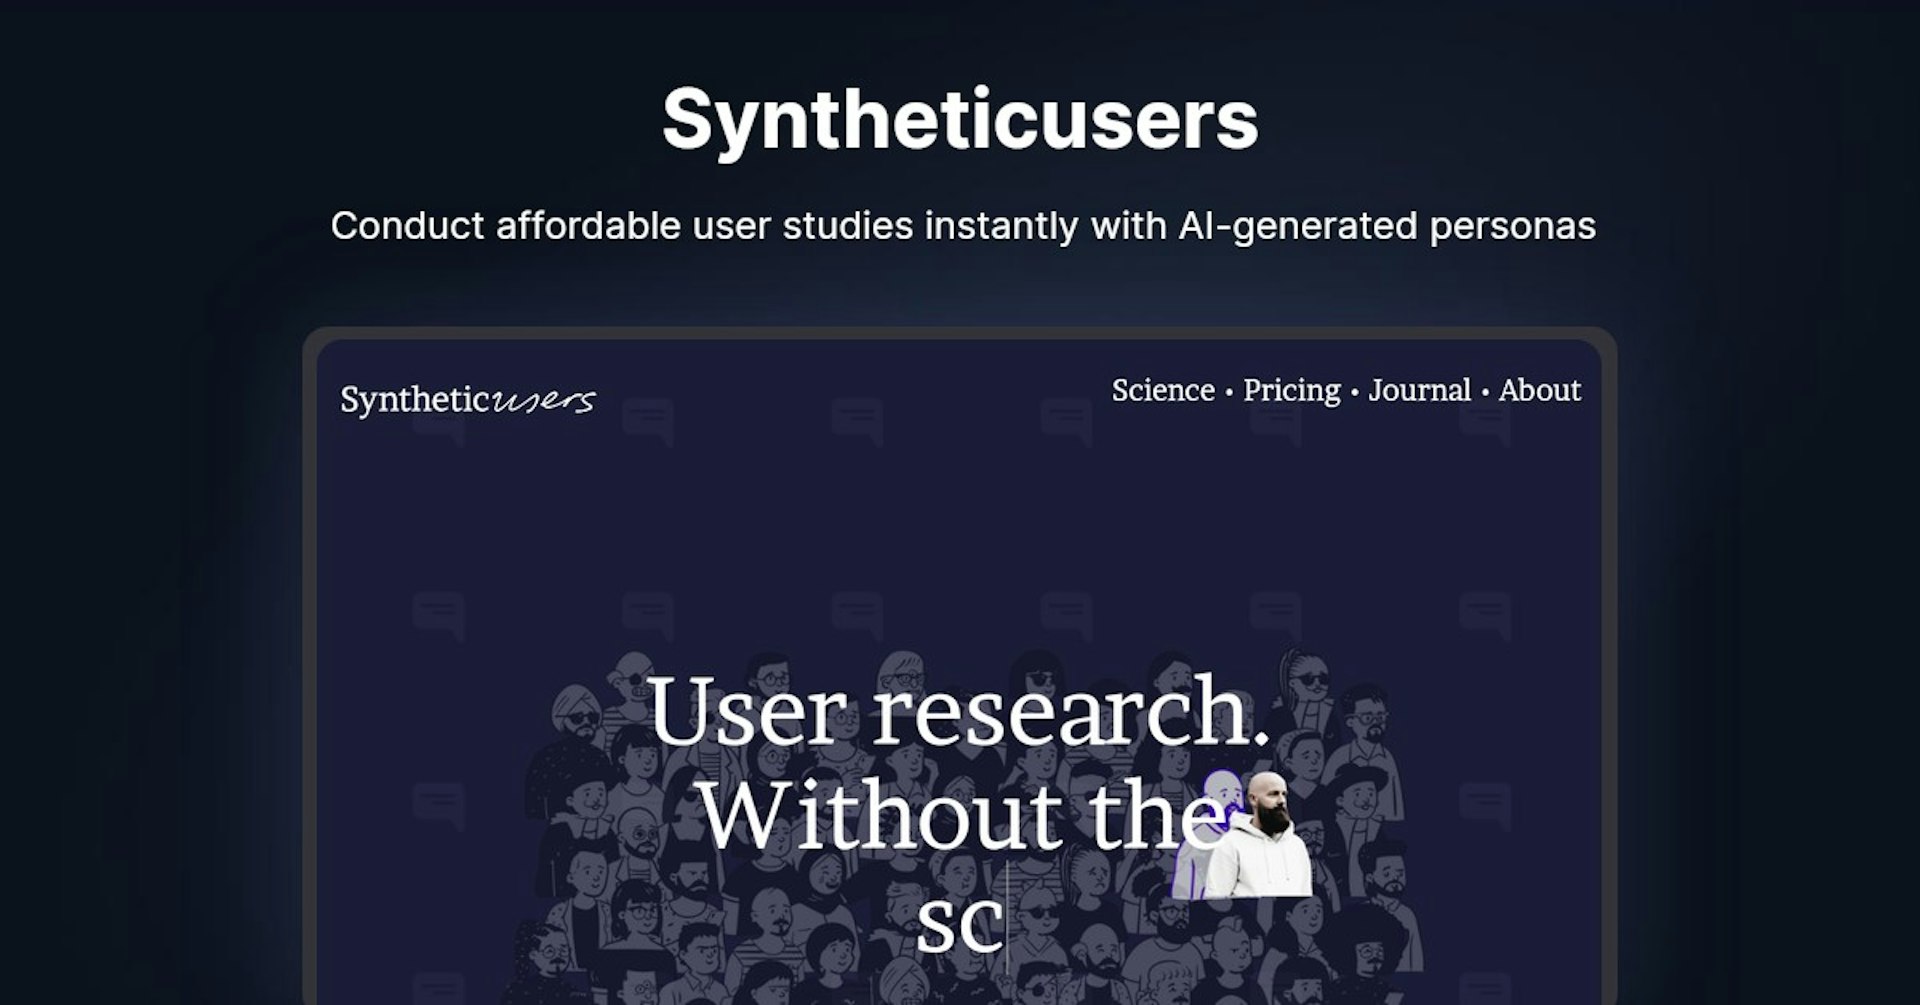 Syntheticusers